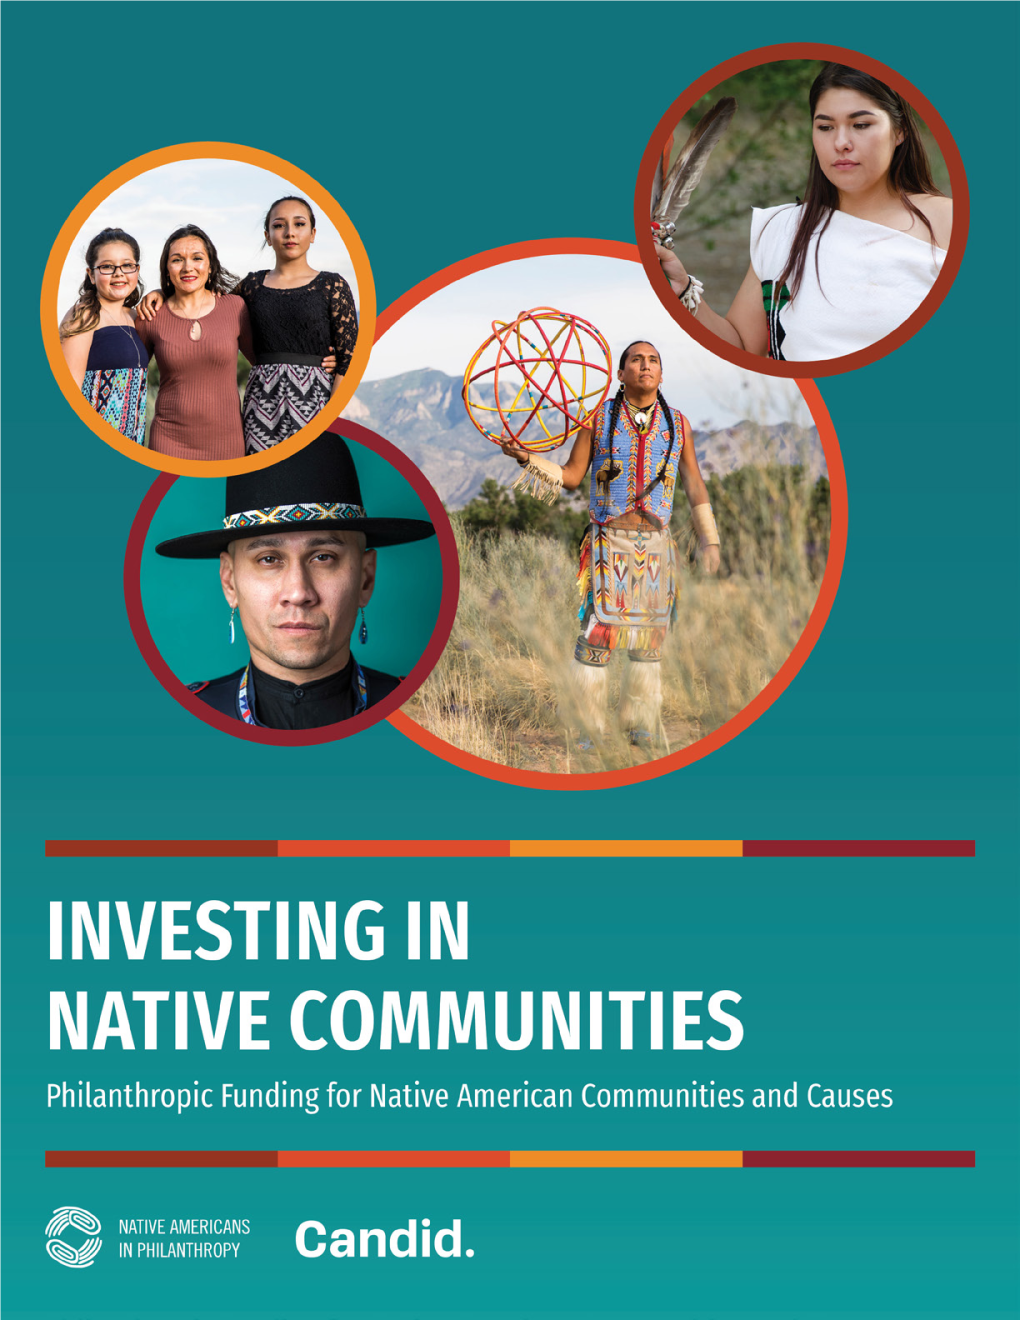 Philanthropic Funding for Native American Communities and Causes